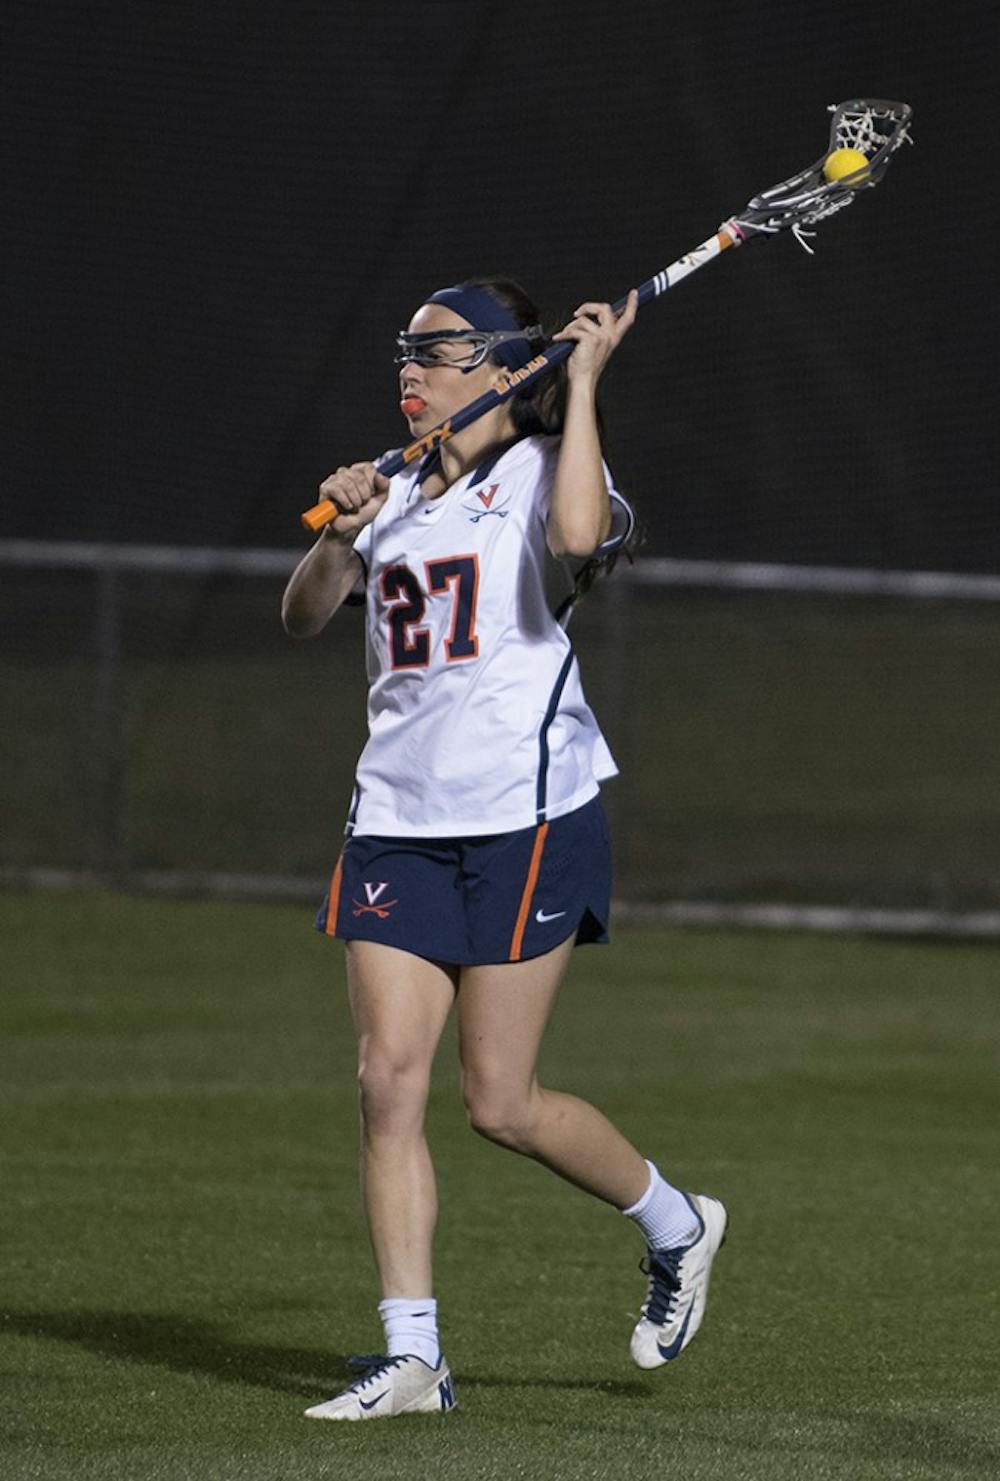 <p>Mary Alati was one of five seniors honored before Saturday's game. The Cavaliers won, 15-14, against Boston College.</p>